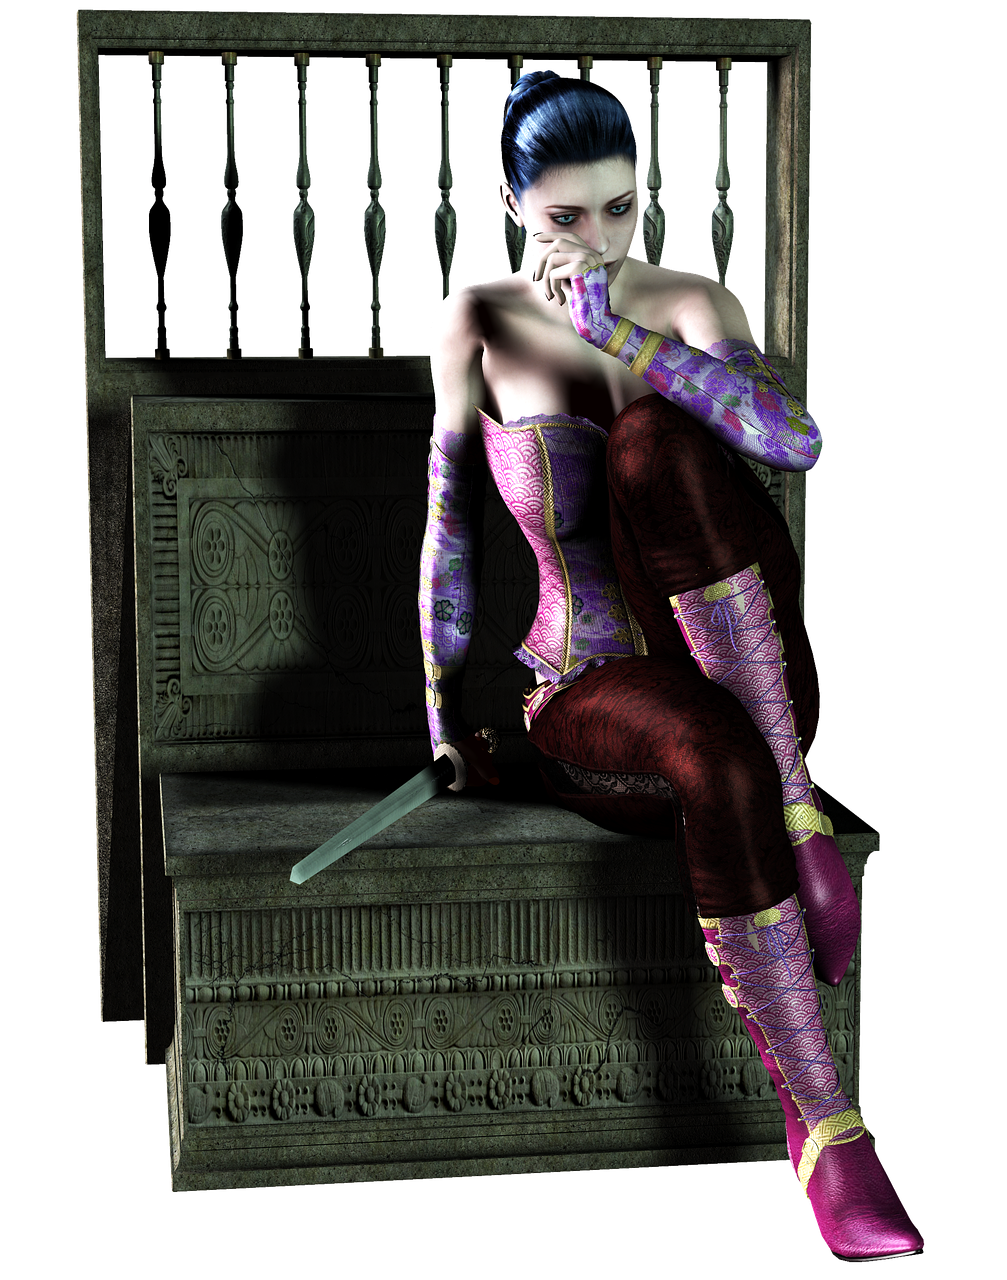 a woman sitting on a bench with a knife in her hand, a 3D render, inspired by Anne Stokes, fuchsia skin beneath the armor, hard lighting!, resident evil inspired, guillotine rgb